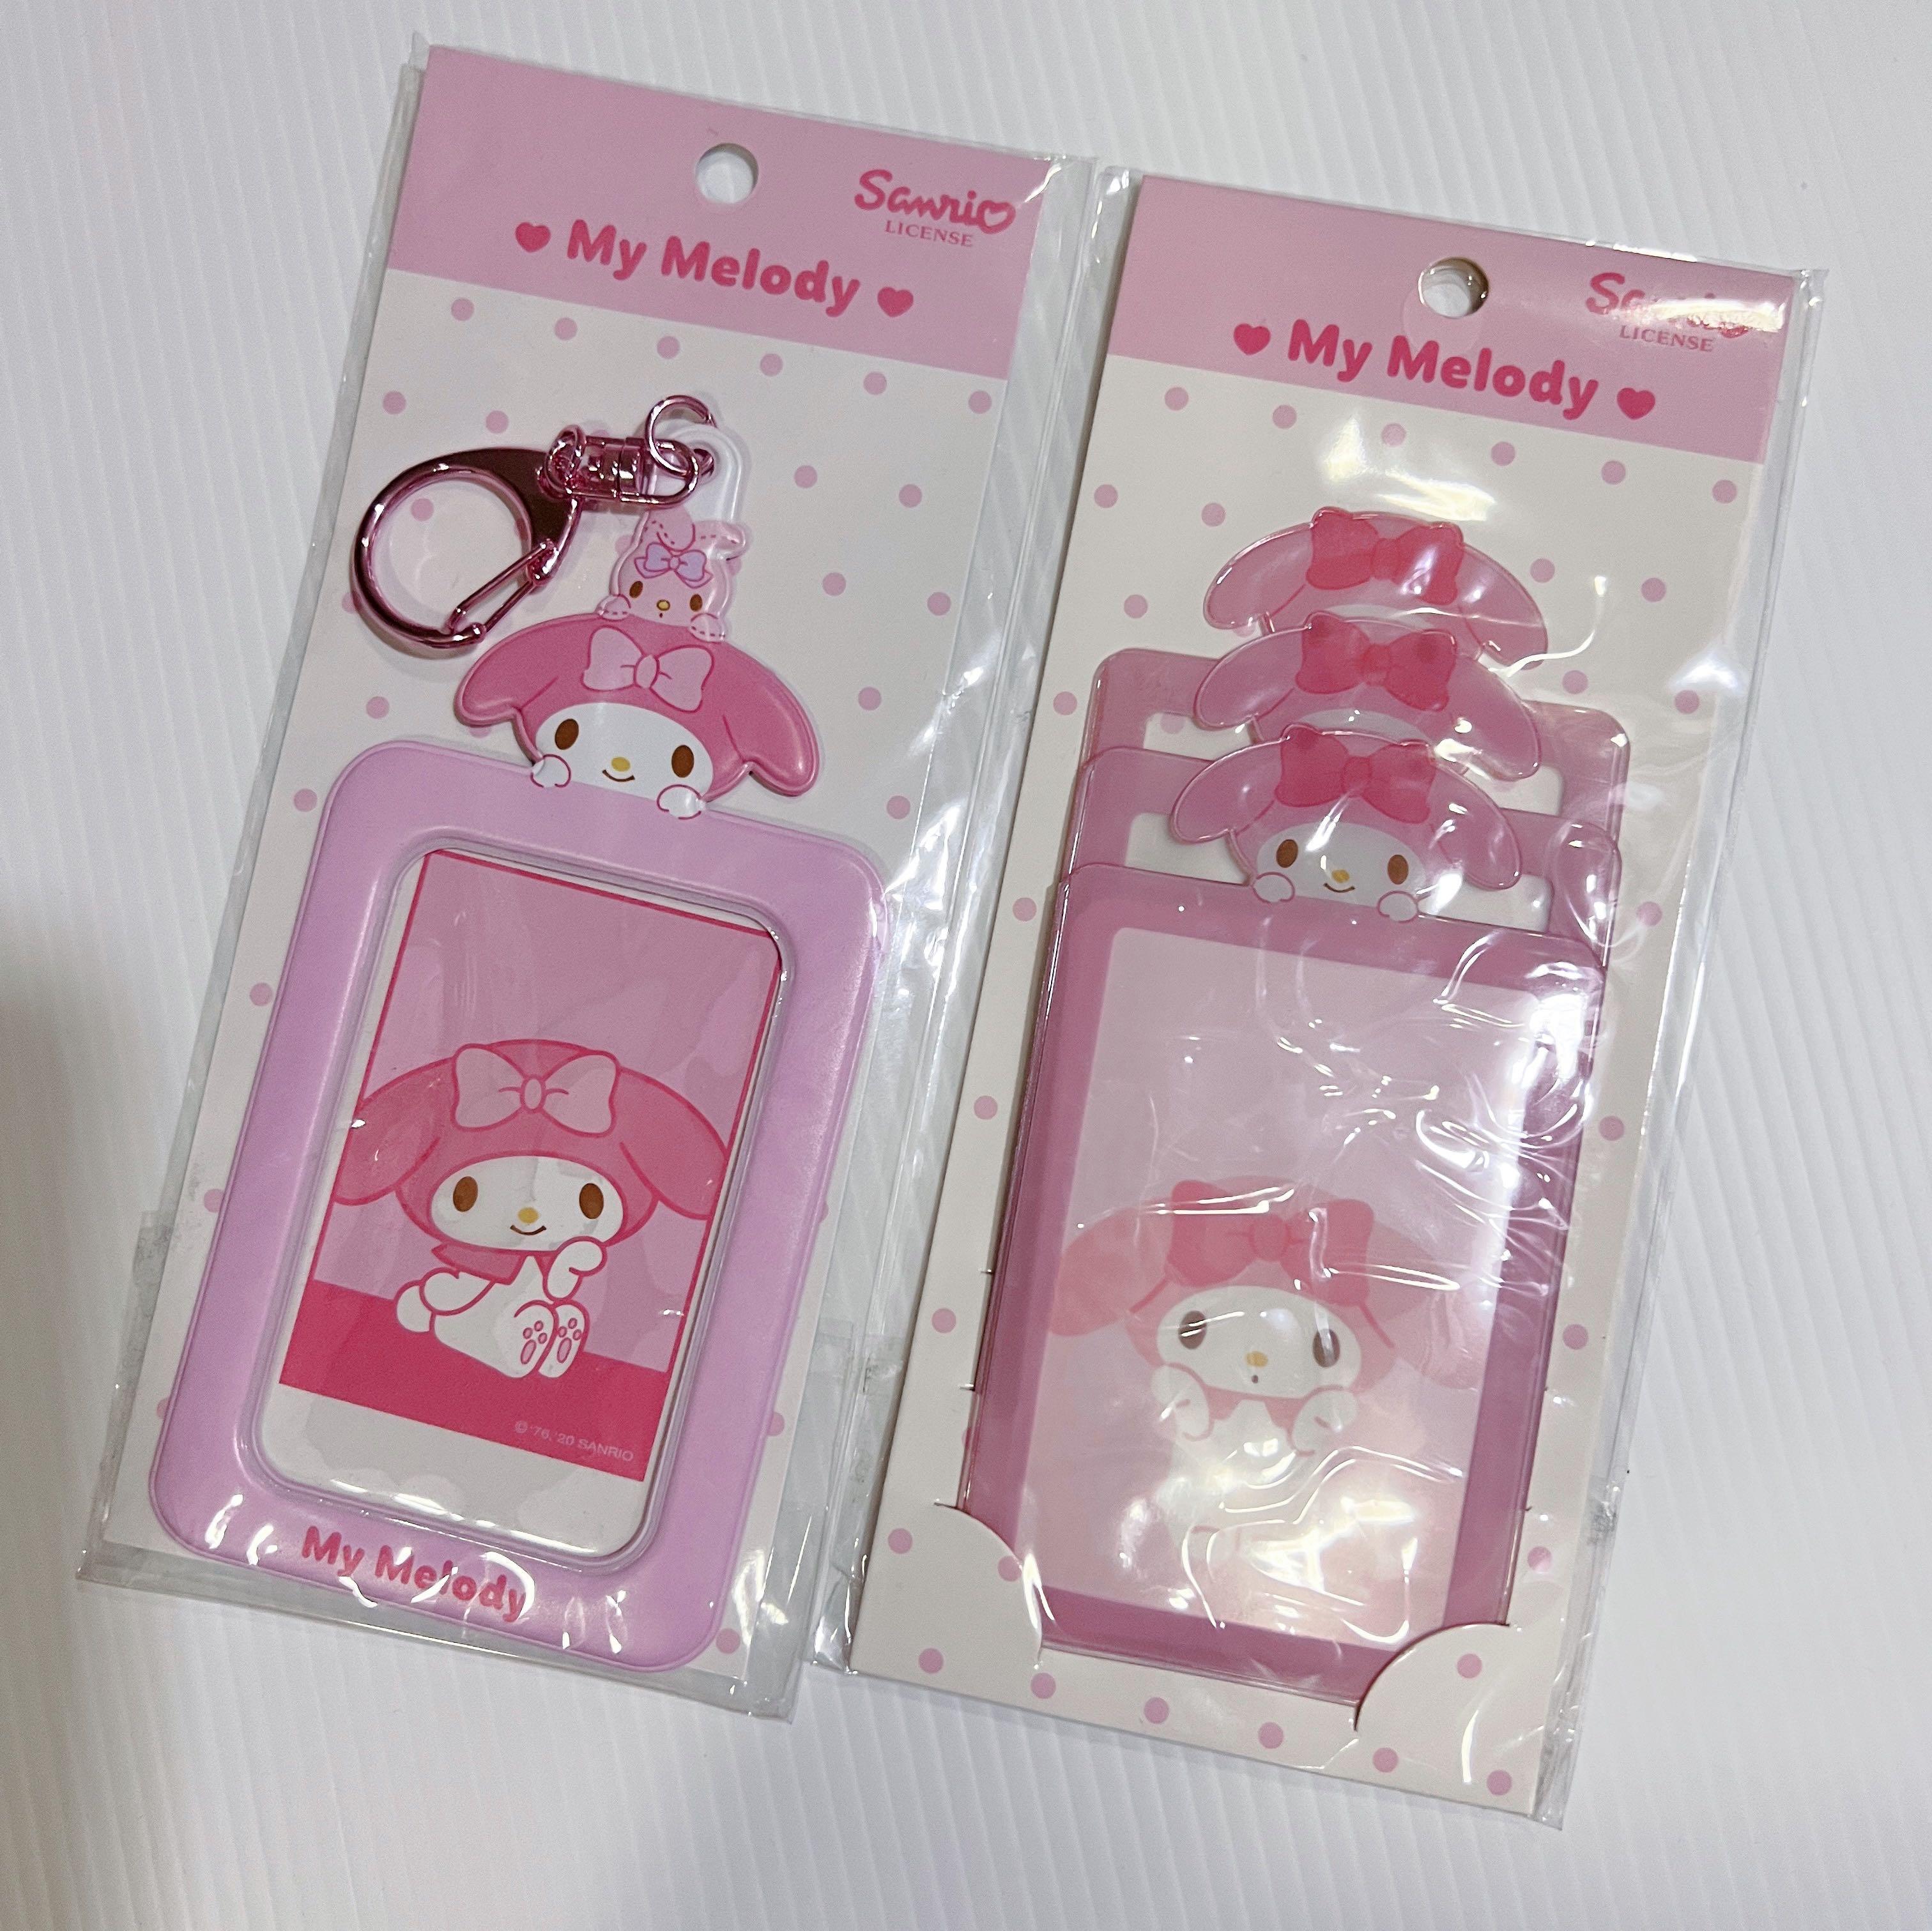 My Melody Sanrio Photocard Holder New Shipping Free Shipping